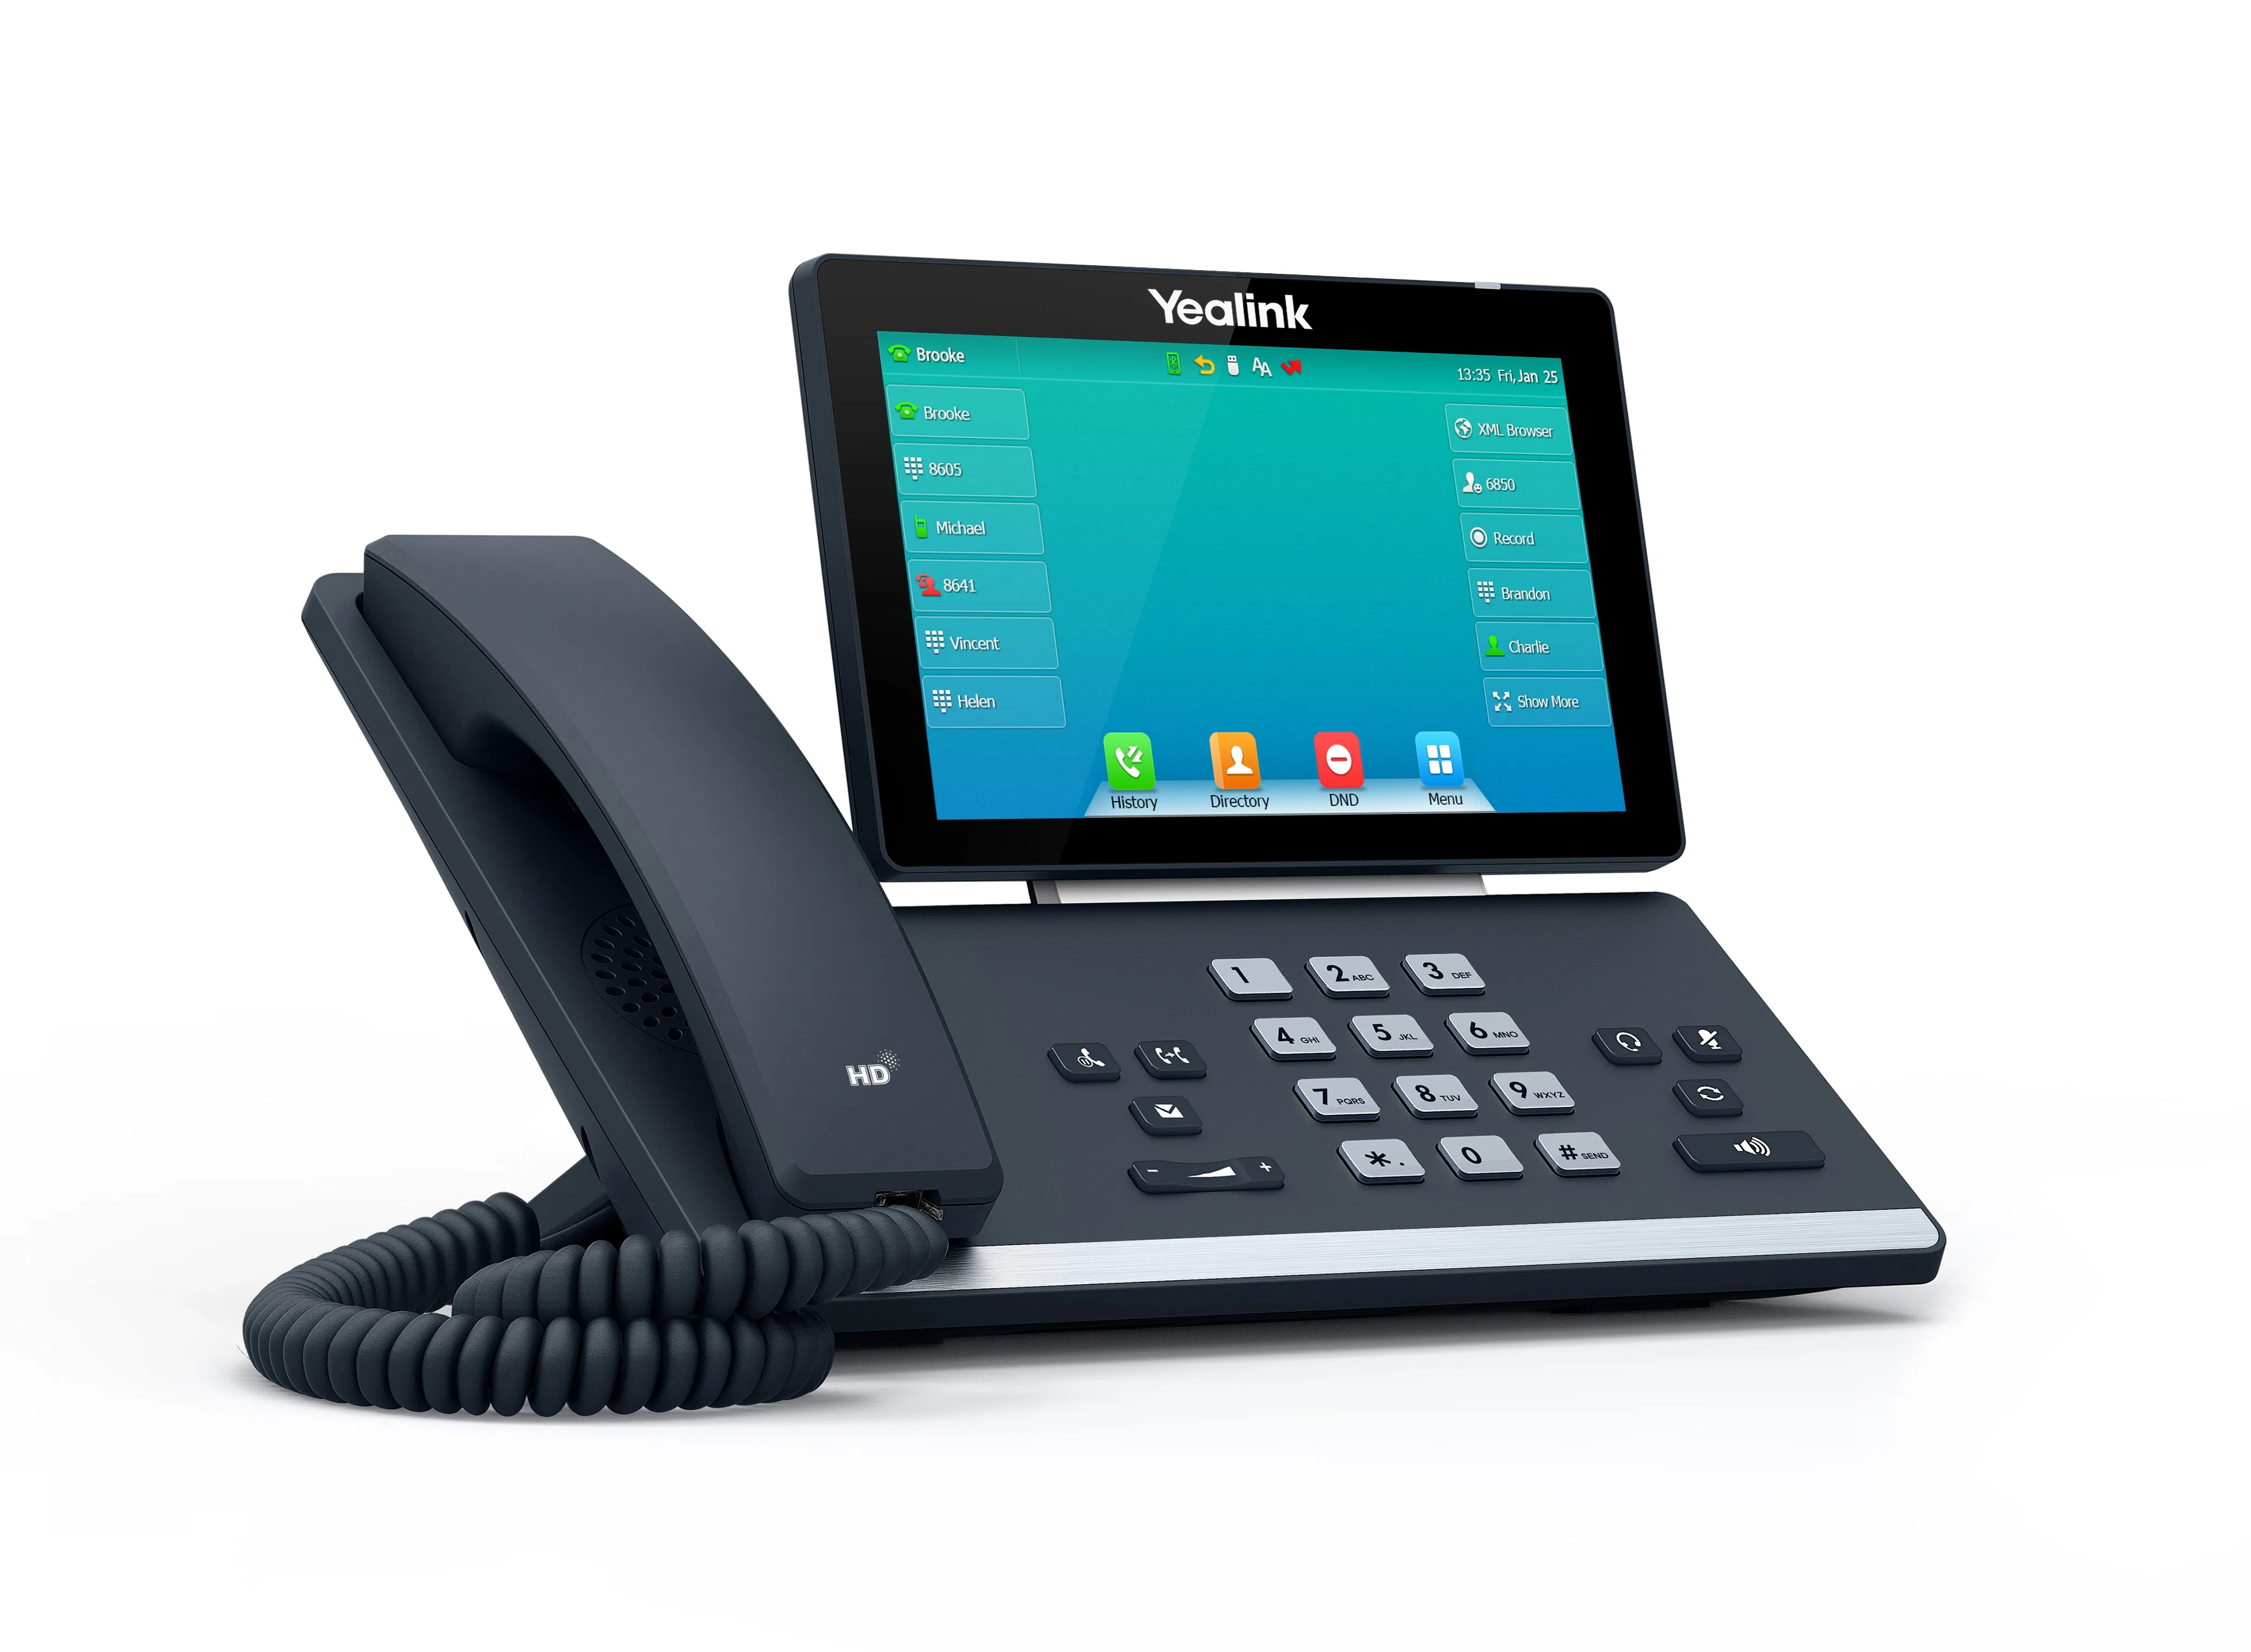 What unique features does the Yealink T57W SIP-T57W Premium IP Phone offer?